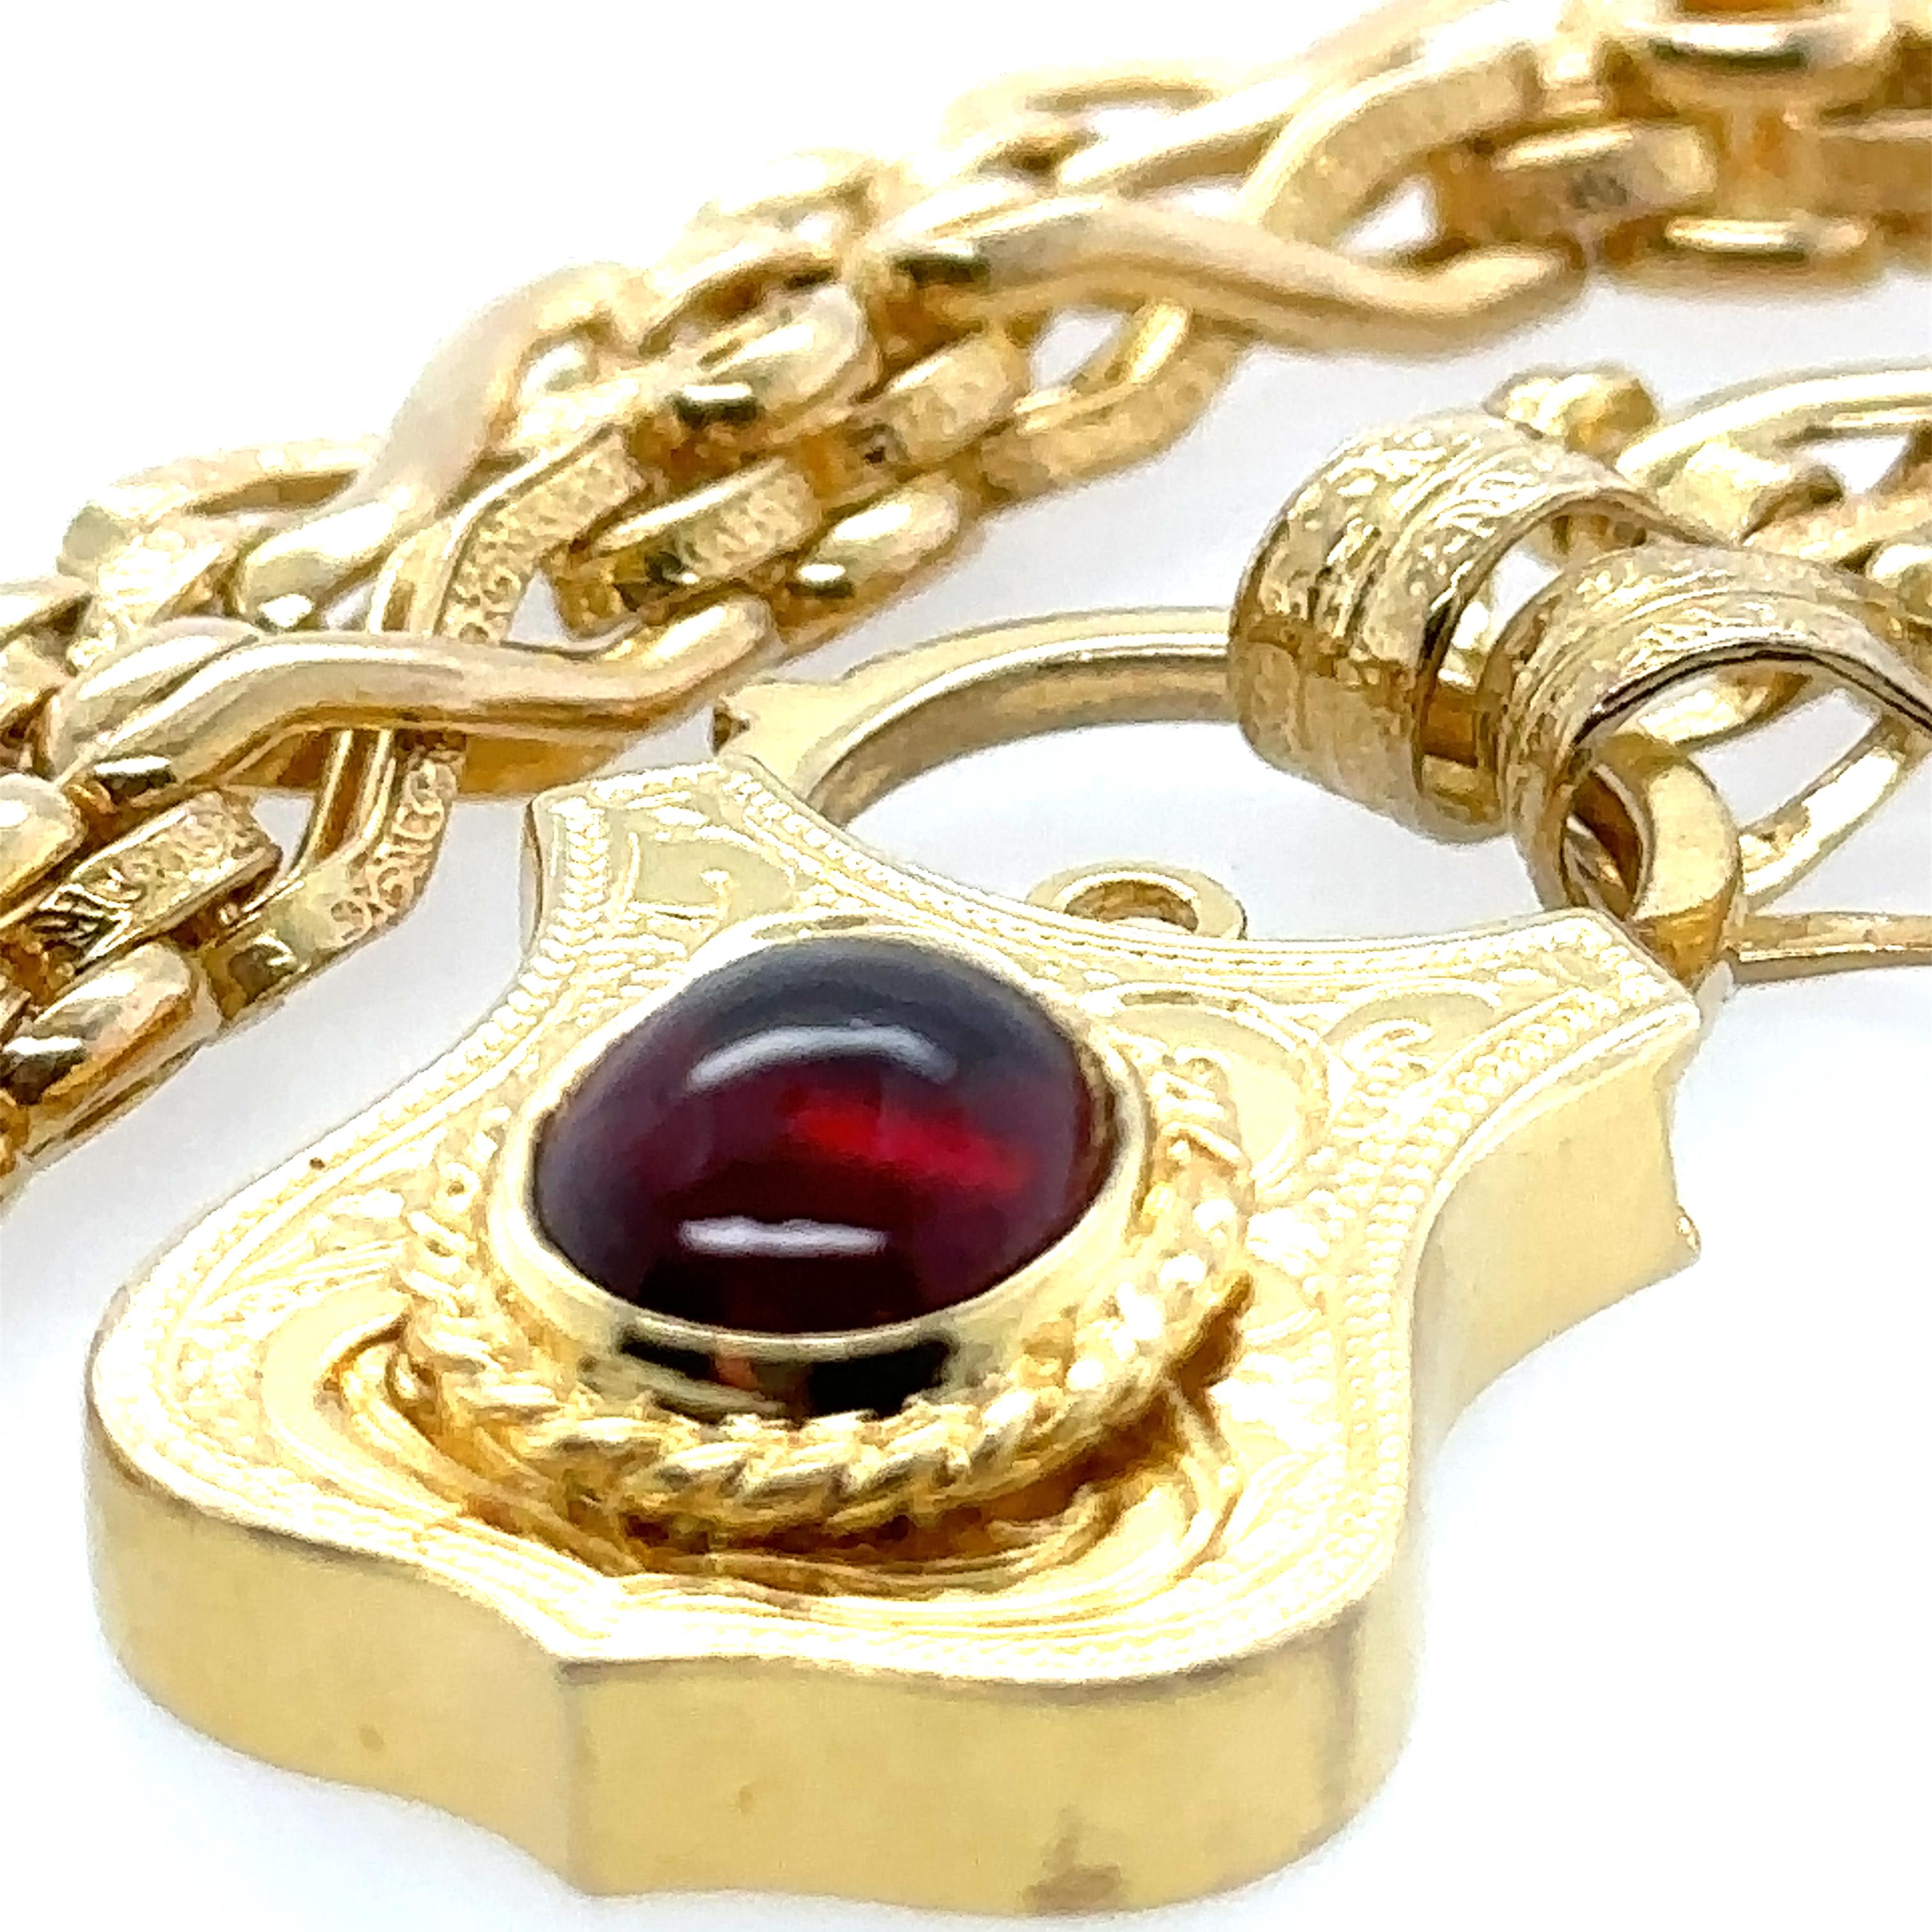 A 9ct Yellow Gold Riveted Patterned Link 45cm Necklace, with a 9ct yellow gold cabochon cut garnet padlock clasp. 

Metal: 9ct Yellow Gold
Carat: N/A
Colour: N/A
Clarity:  N/A
Cut: Cabochon Cut
Weight: 37.73 grams
Engravings/Markings: 375